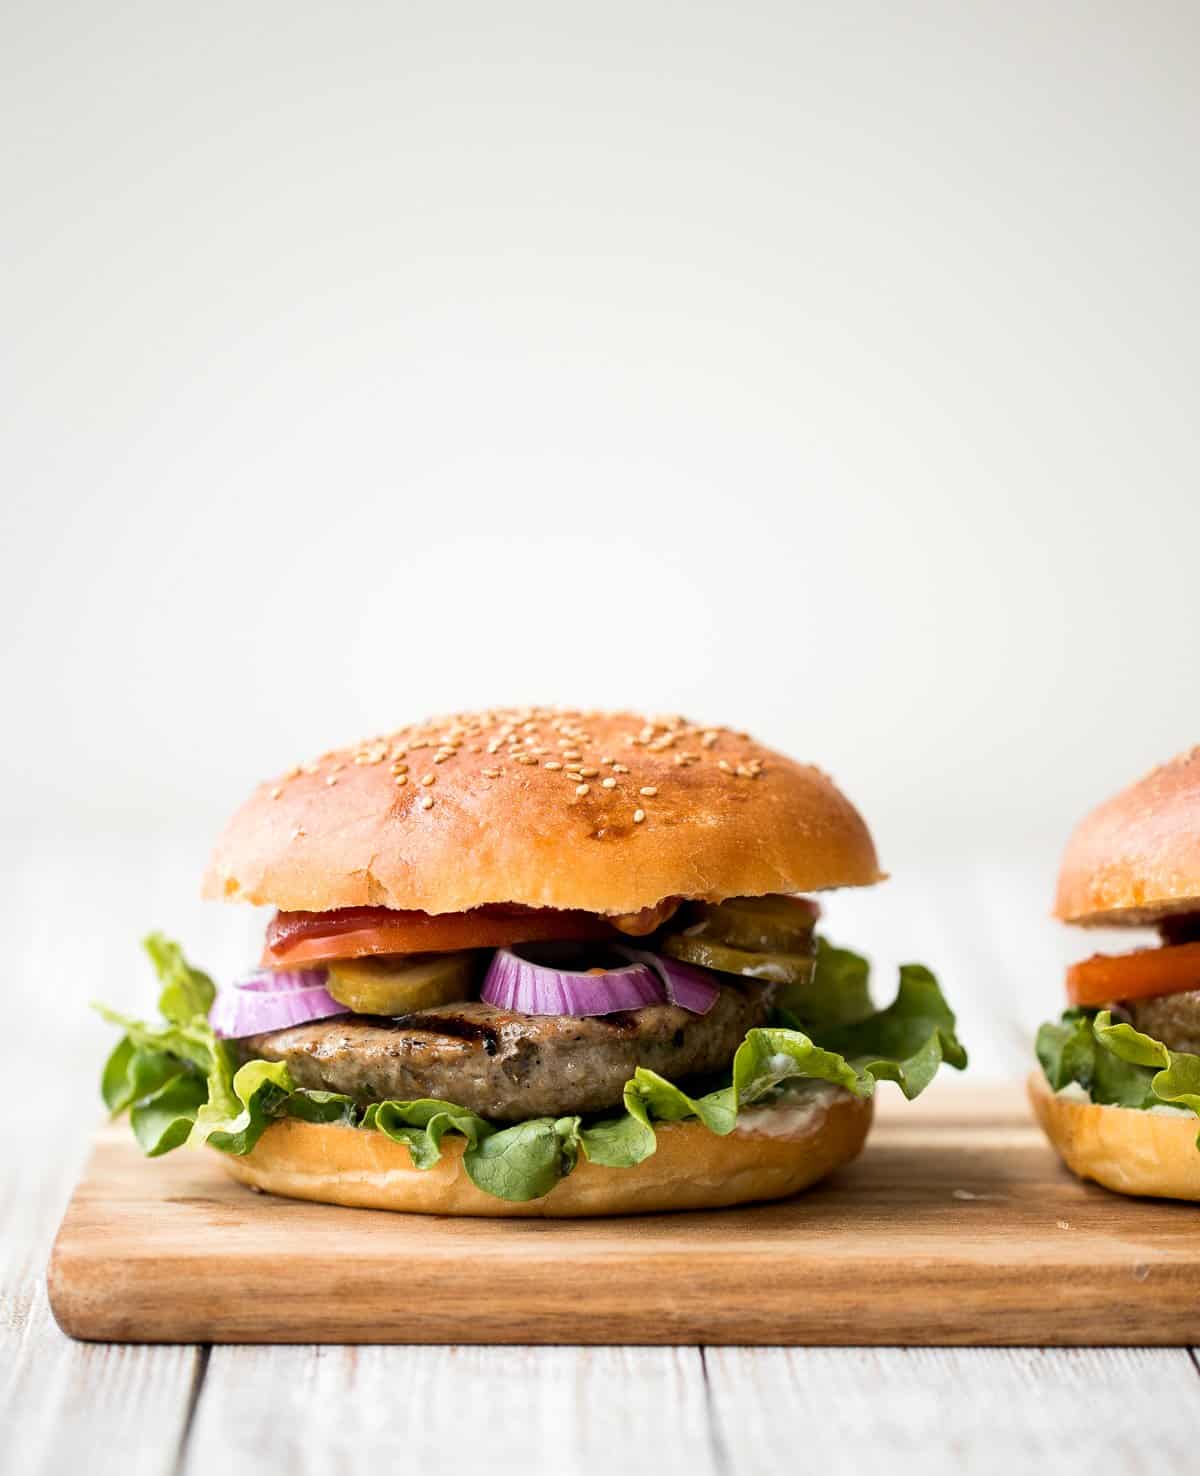 Better than the steakhouse, these classic juicy hamburgers are perfectly seasoned, so flavourful and delicious. Make them on the grill or on the stove. | aheadofthyme.com